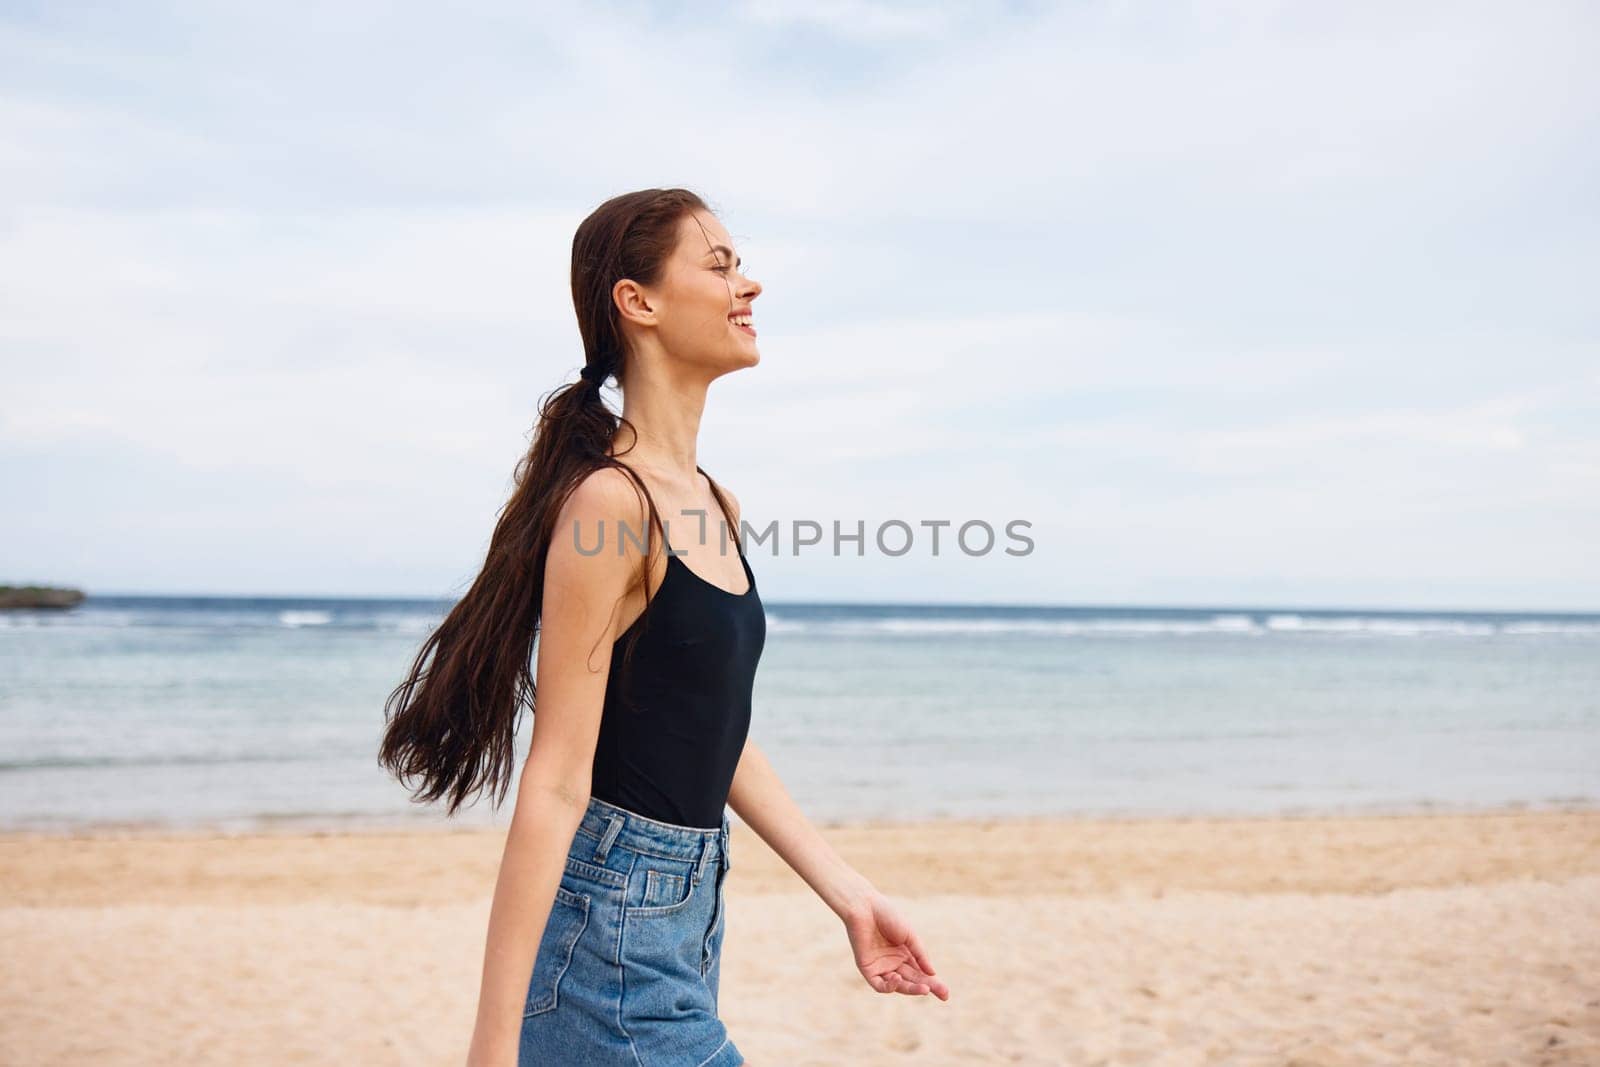 leisure woman young summer vacation activity space sand flight beach running smile sea happiness body travel lifestyle copy wave sunset smiling happy